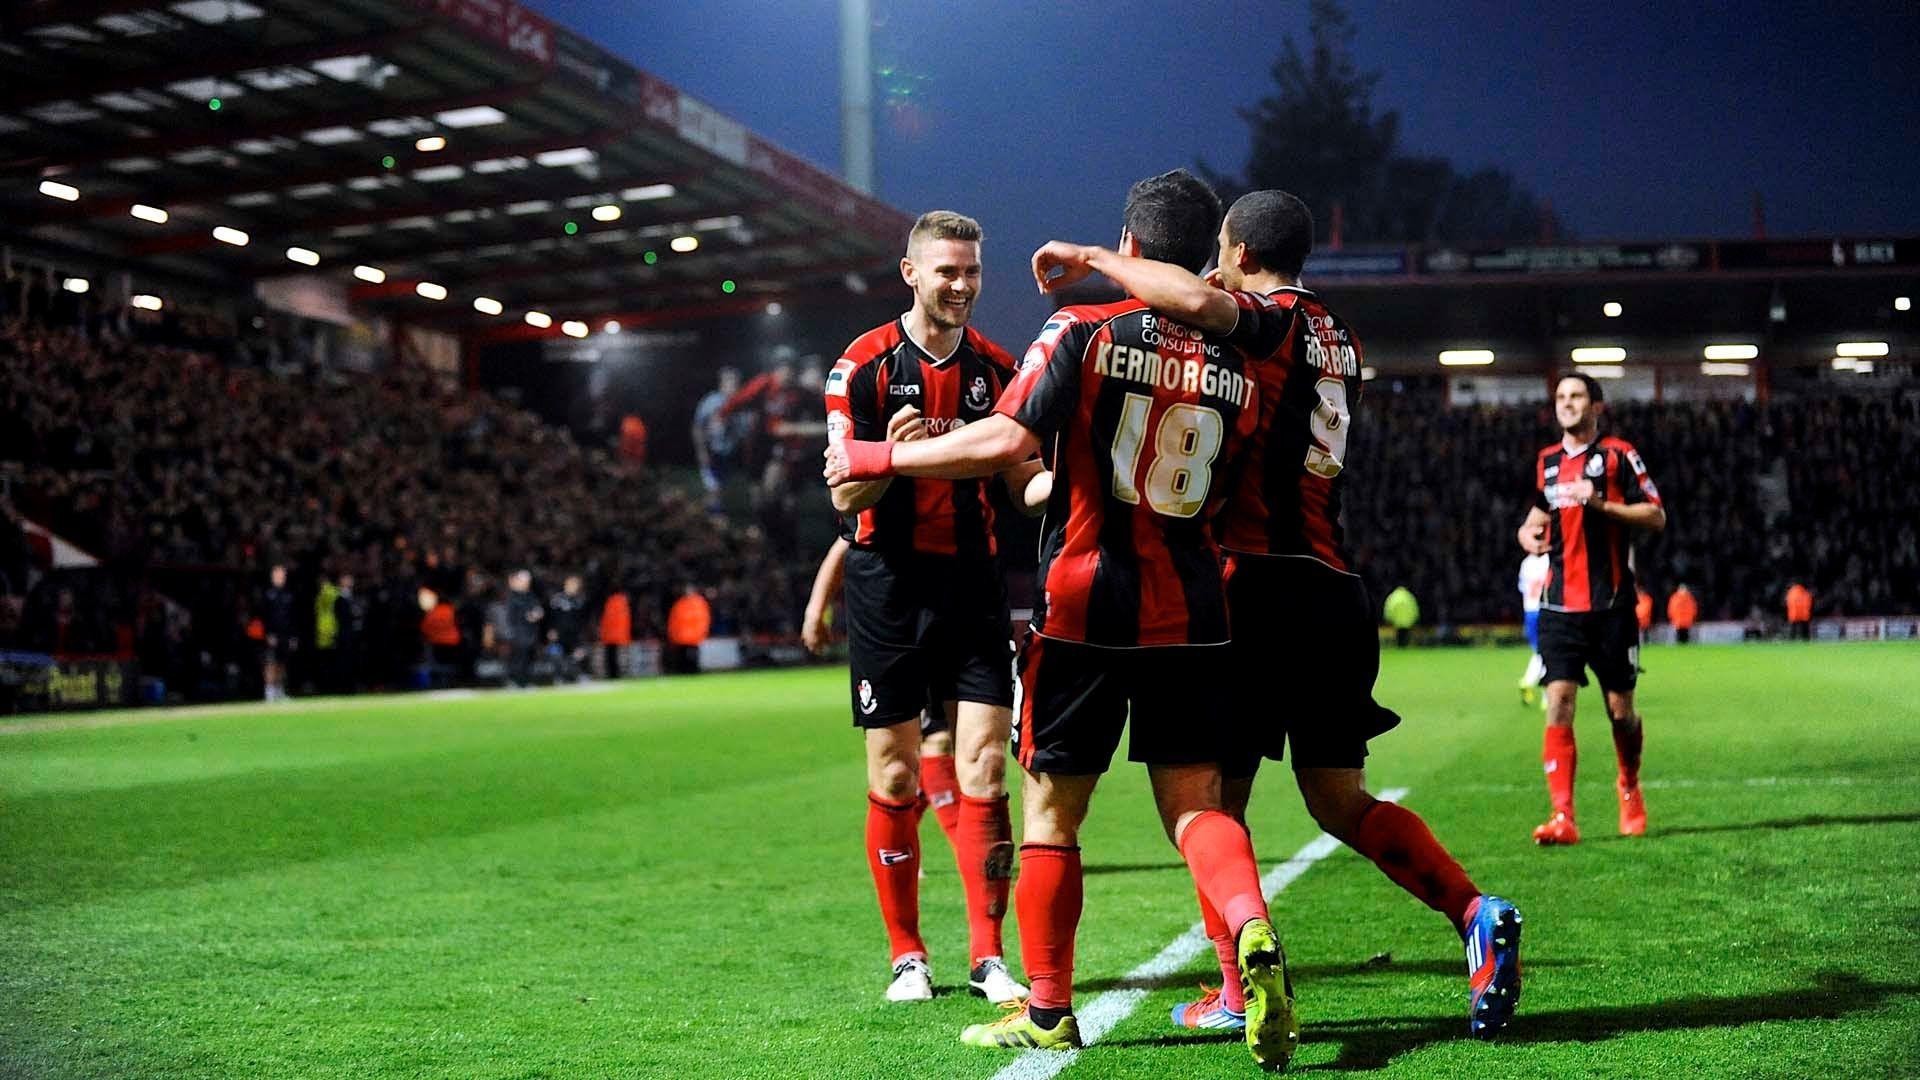 afc bournemouth. Afc Bournemouth Football Wallpaper